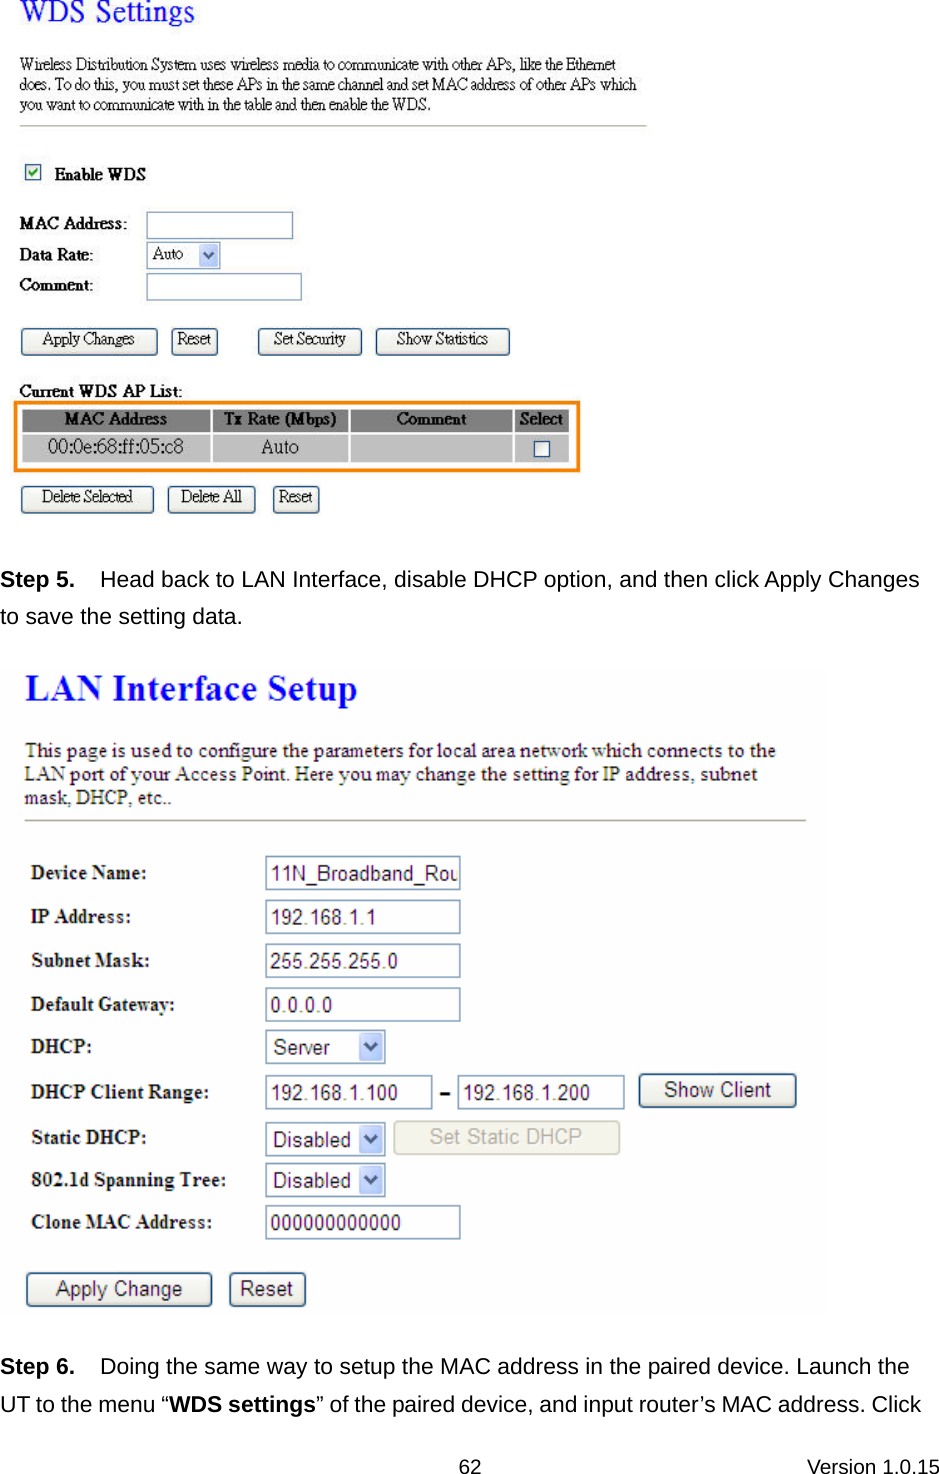 Version 1.0.15 62 Step 5.  Head back to LAN Interface, disable DHCP option, and then click Apply Changes to save the setting data.  Step 6.  Doing the same way to setup the MAC address in the paired device. Launch the UT to the menu “WDS settings” of the paired device, and input router’s MAC address. Click 